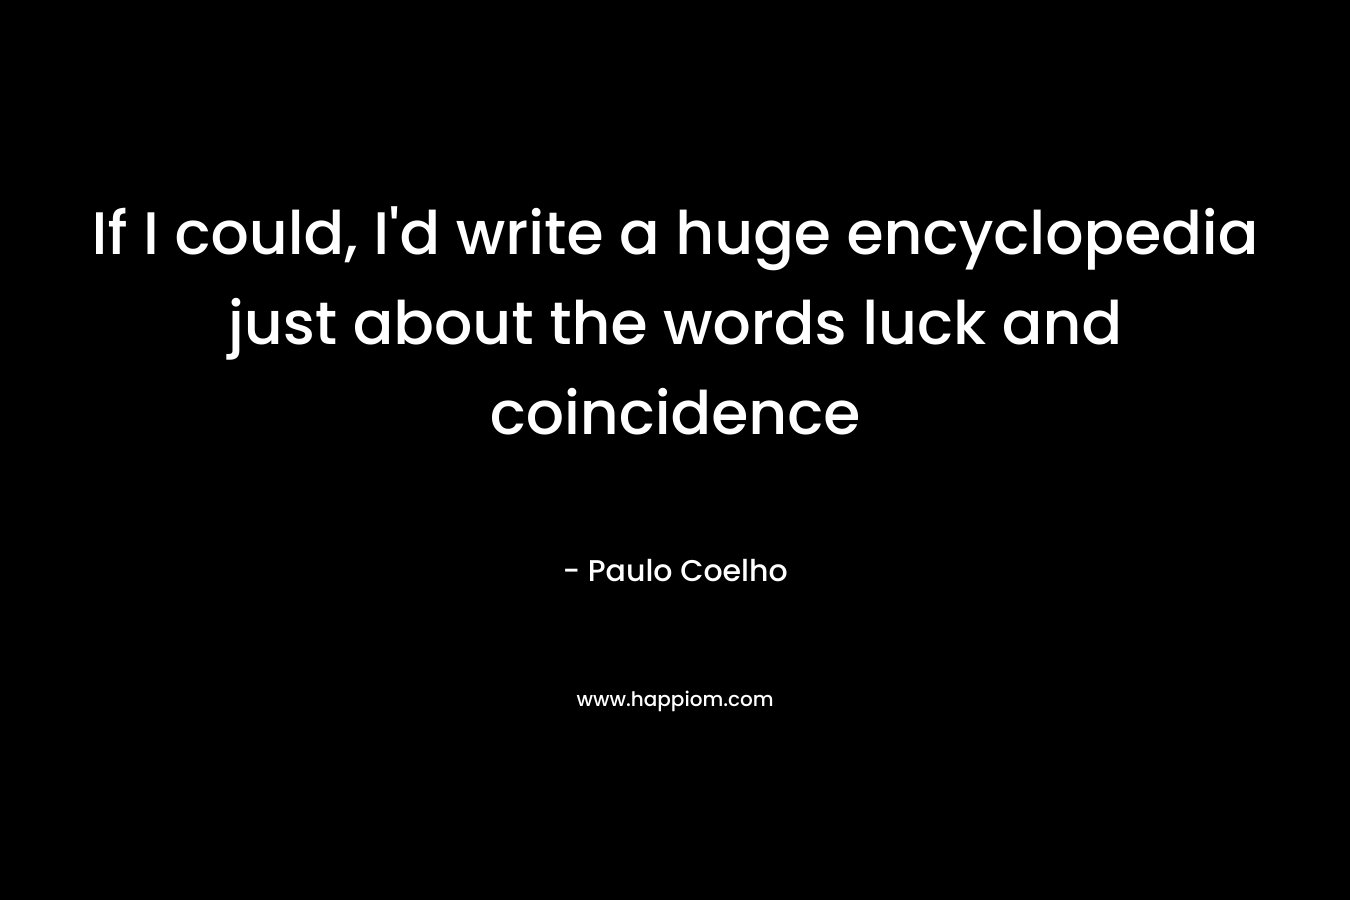 If I could, I’d write a huge encyclopedia just about the words luck and coincidence – Paulo Coelho